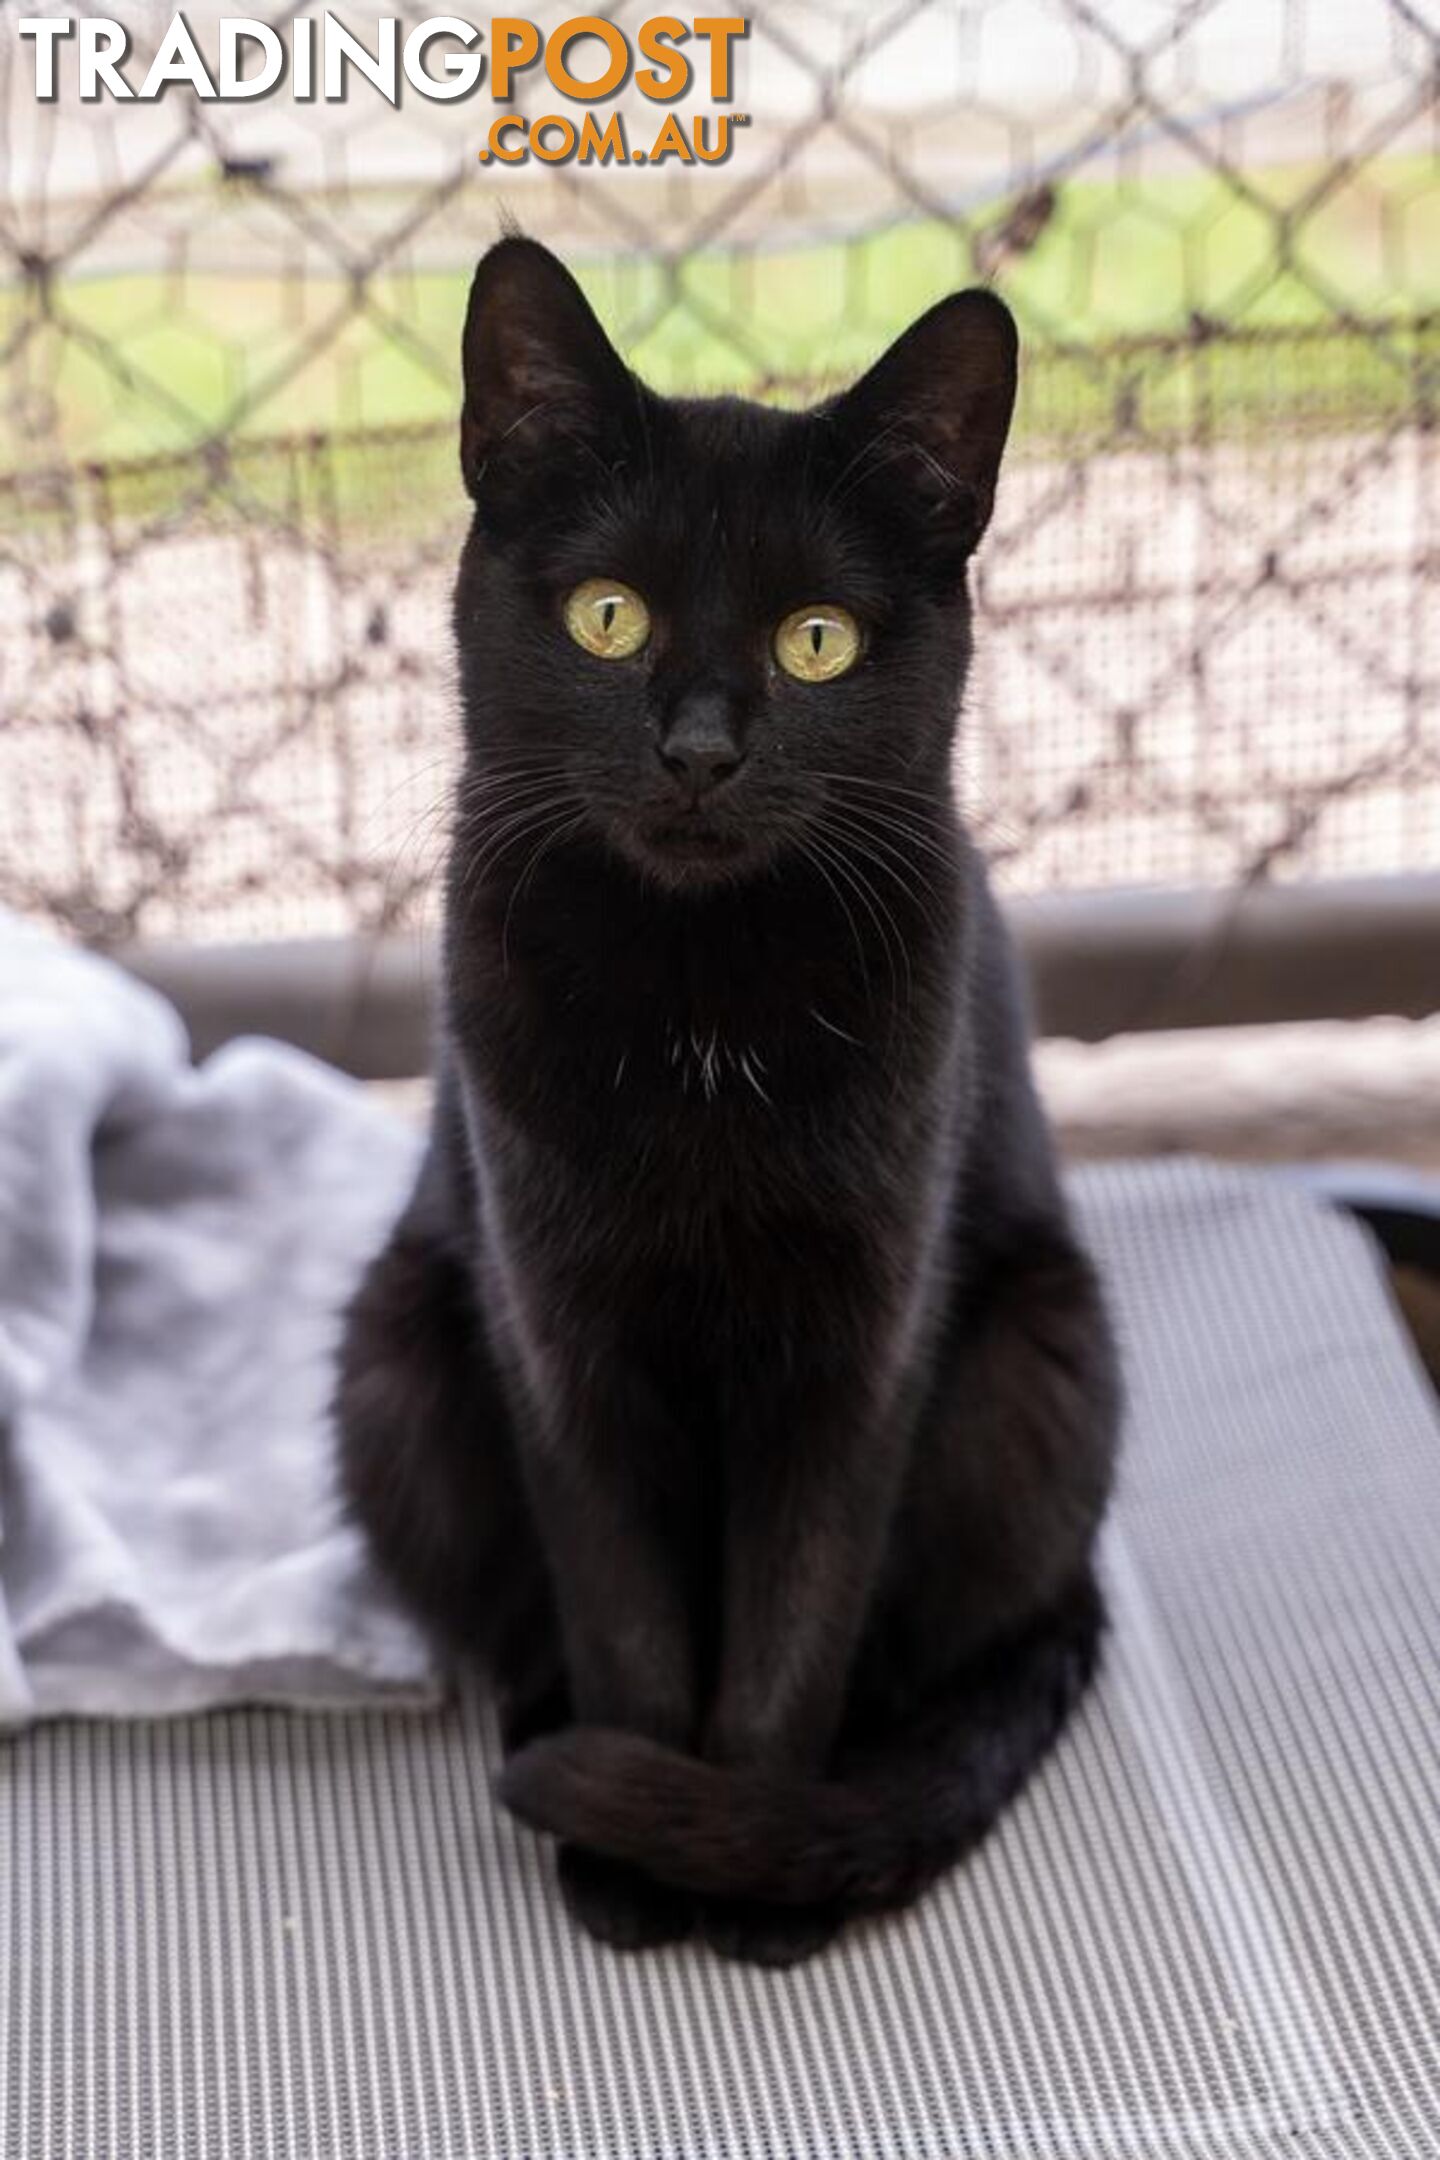 Sassie - Domestic Short Hair, 1 Year 2 Months 3 Weeks (approx)